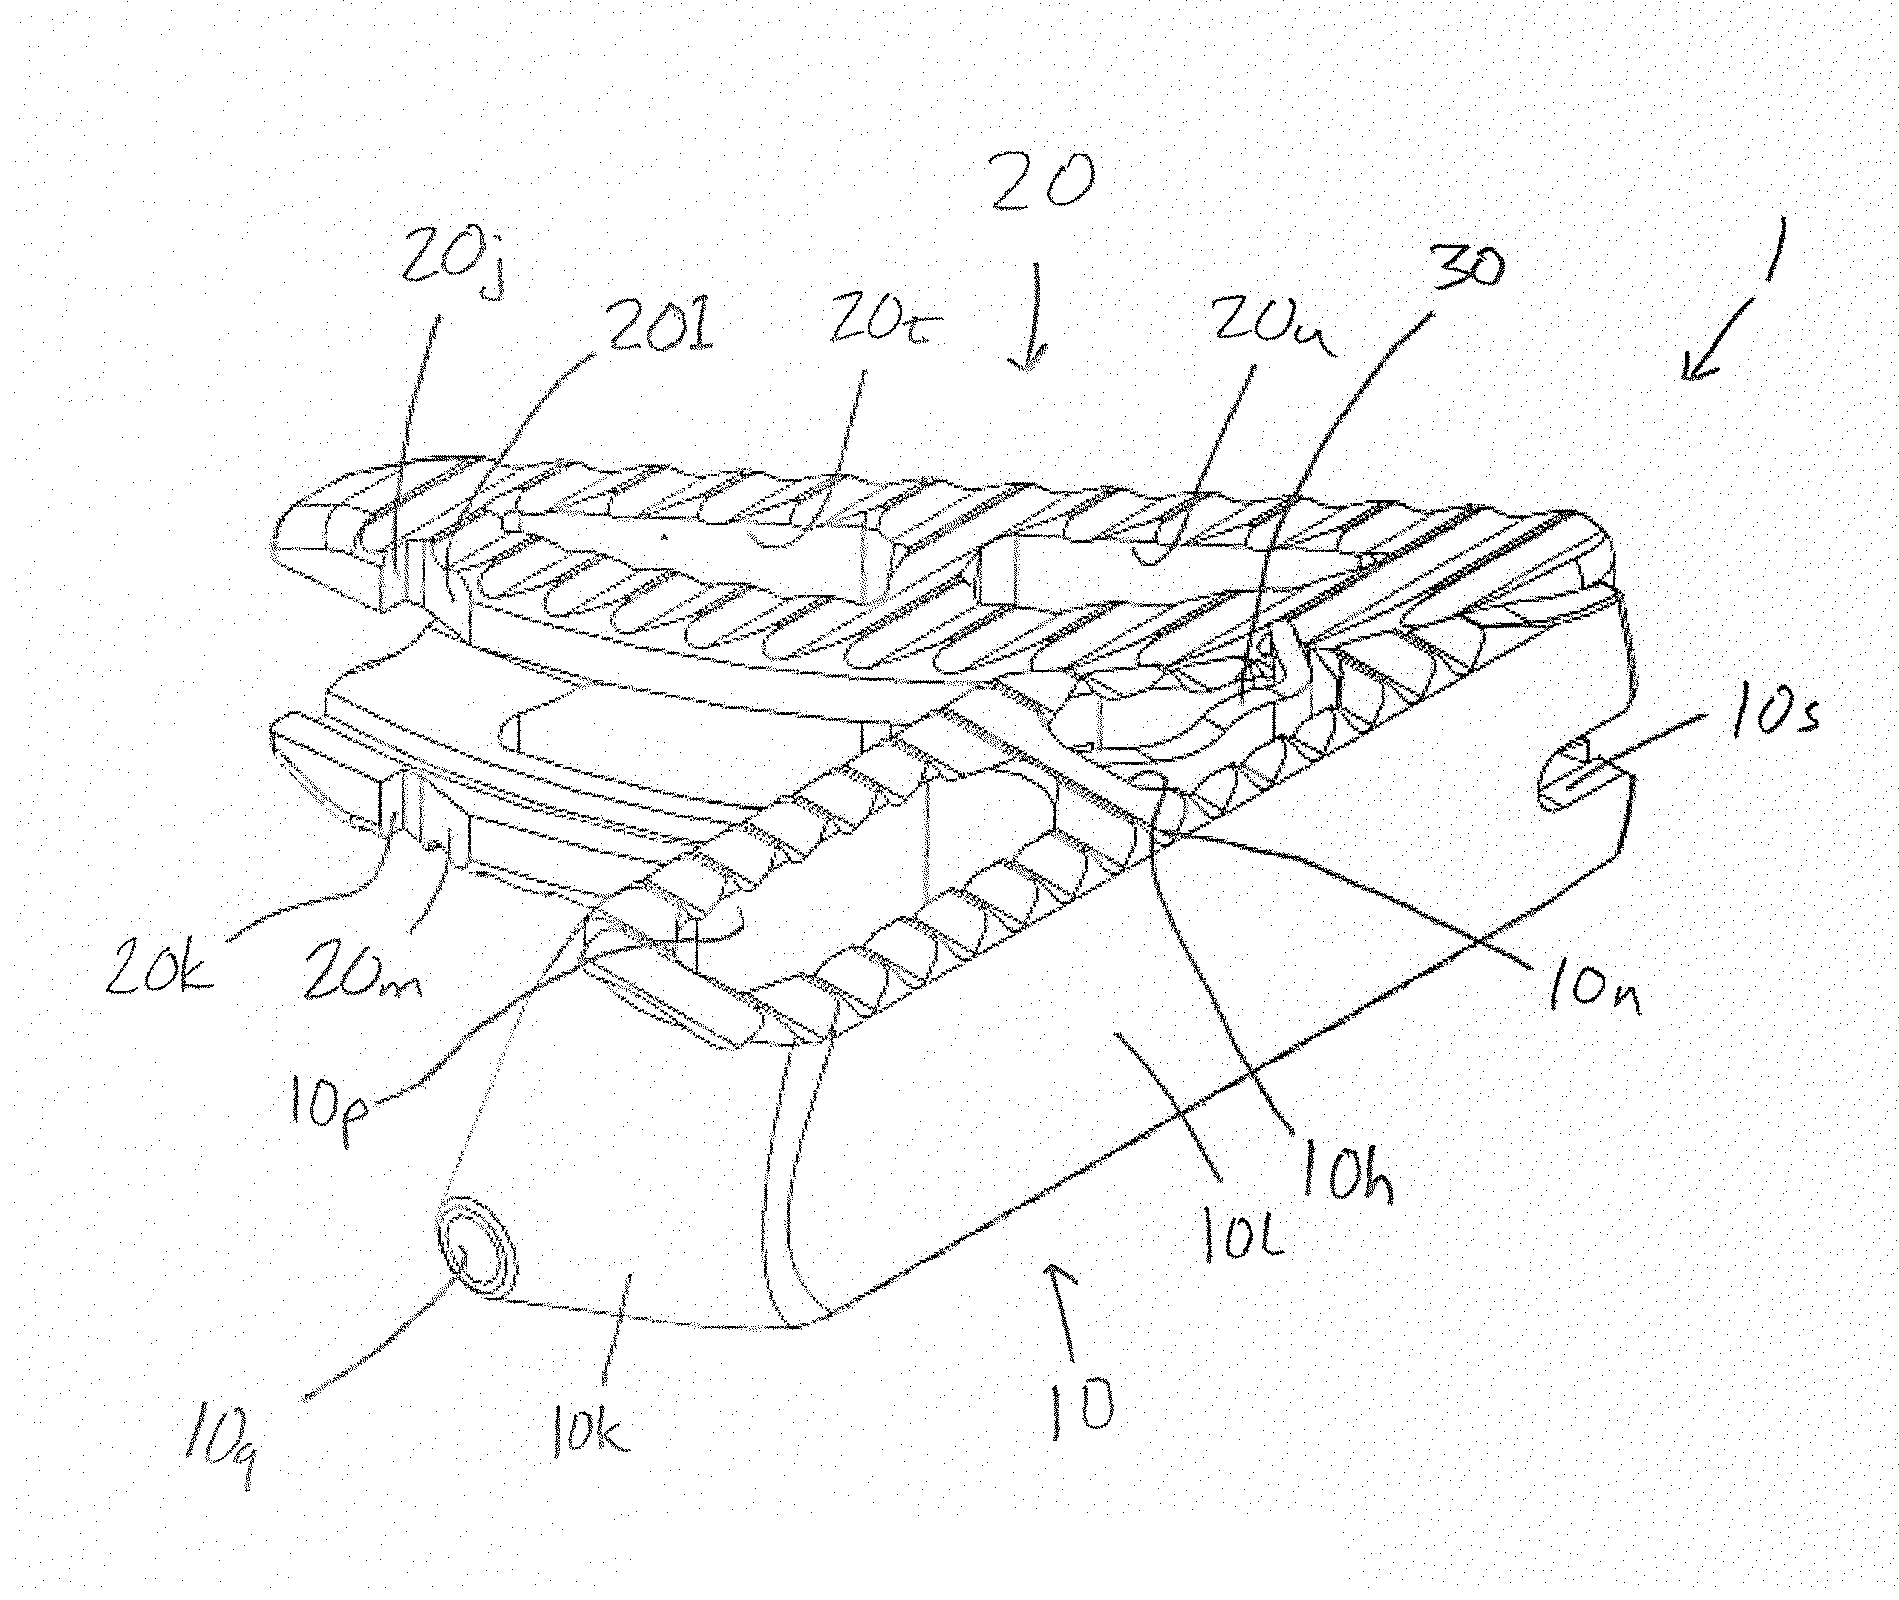 Expandable intervertebral device, and systems and methods for inserting same